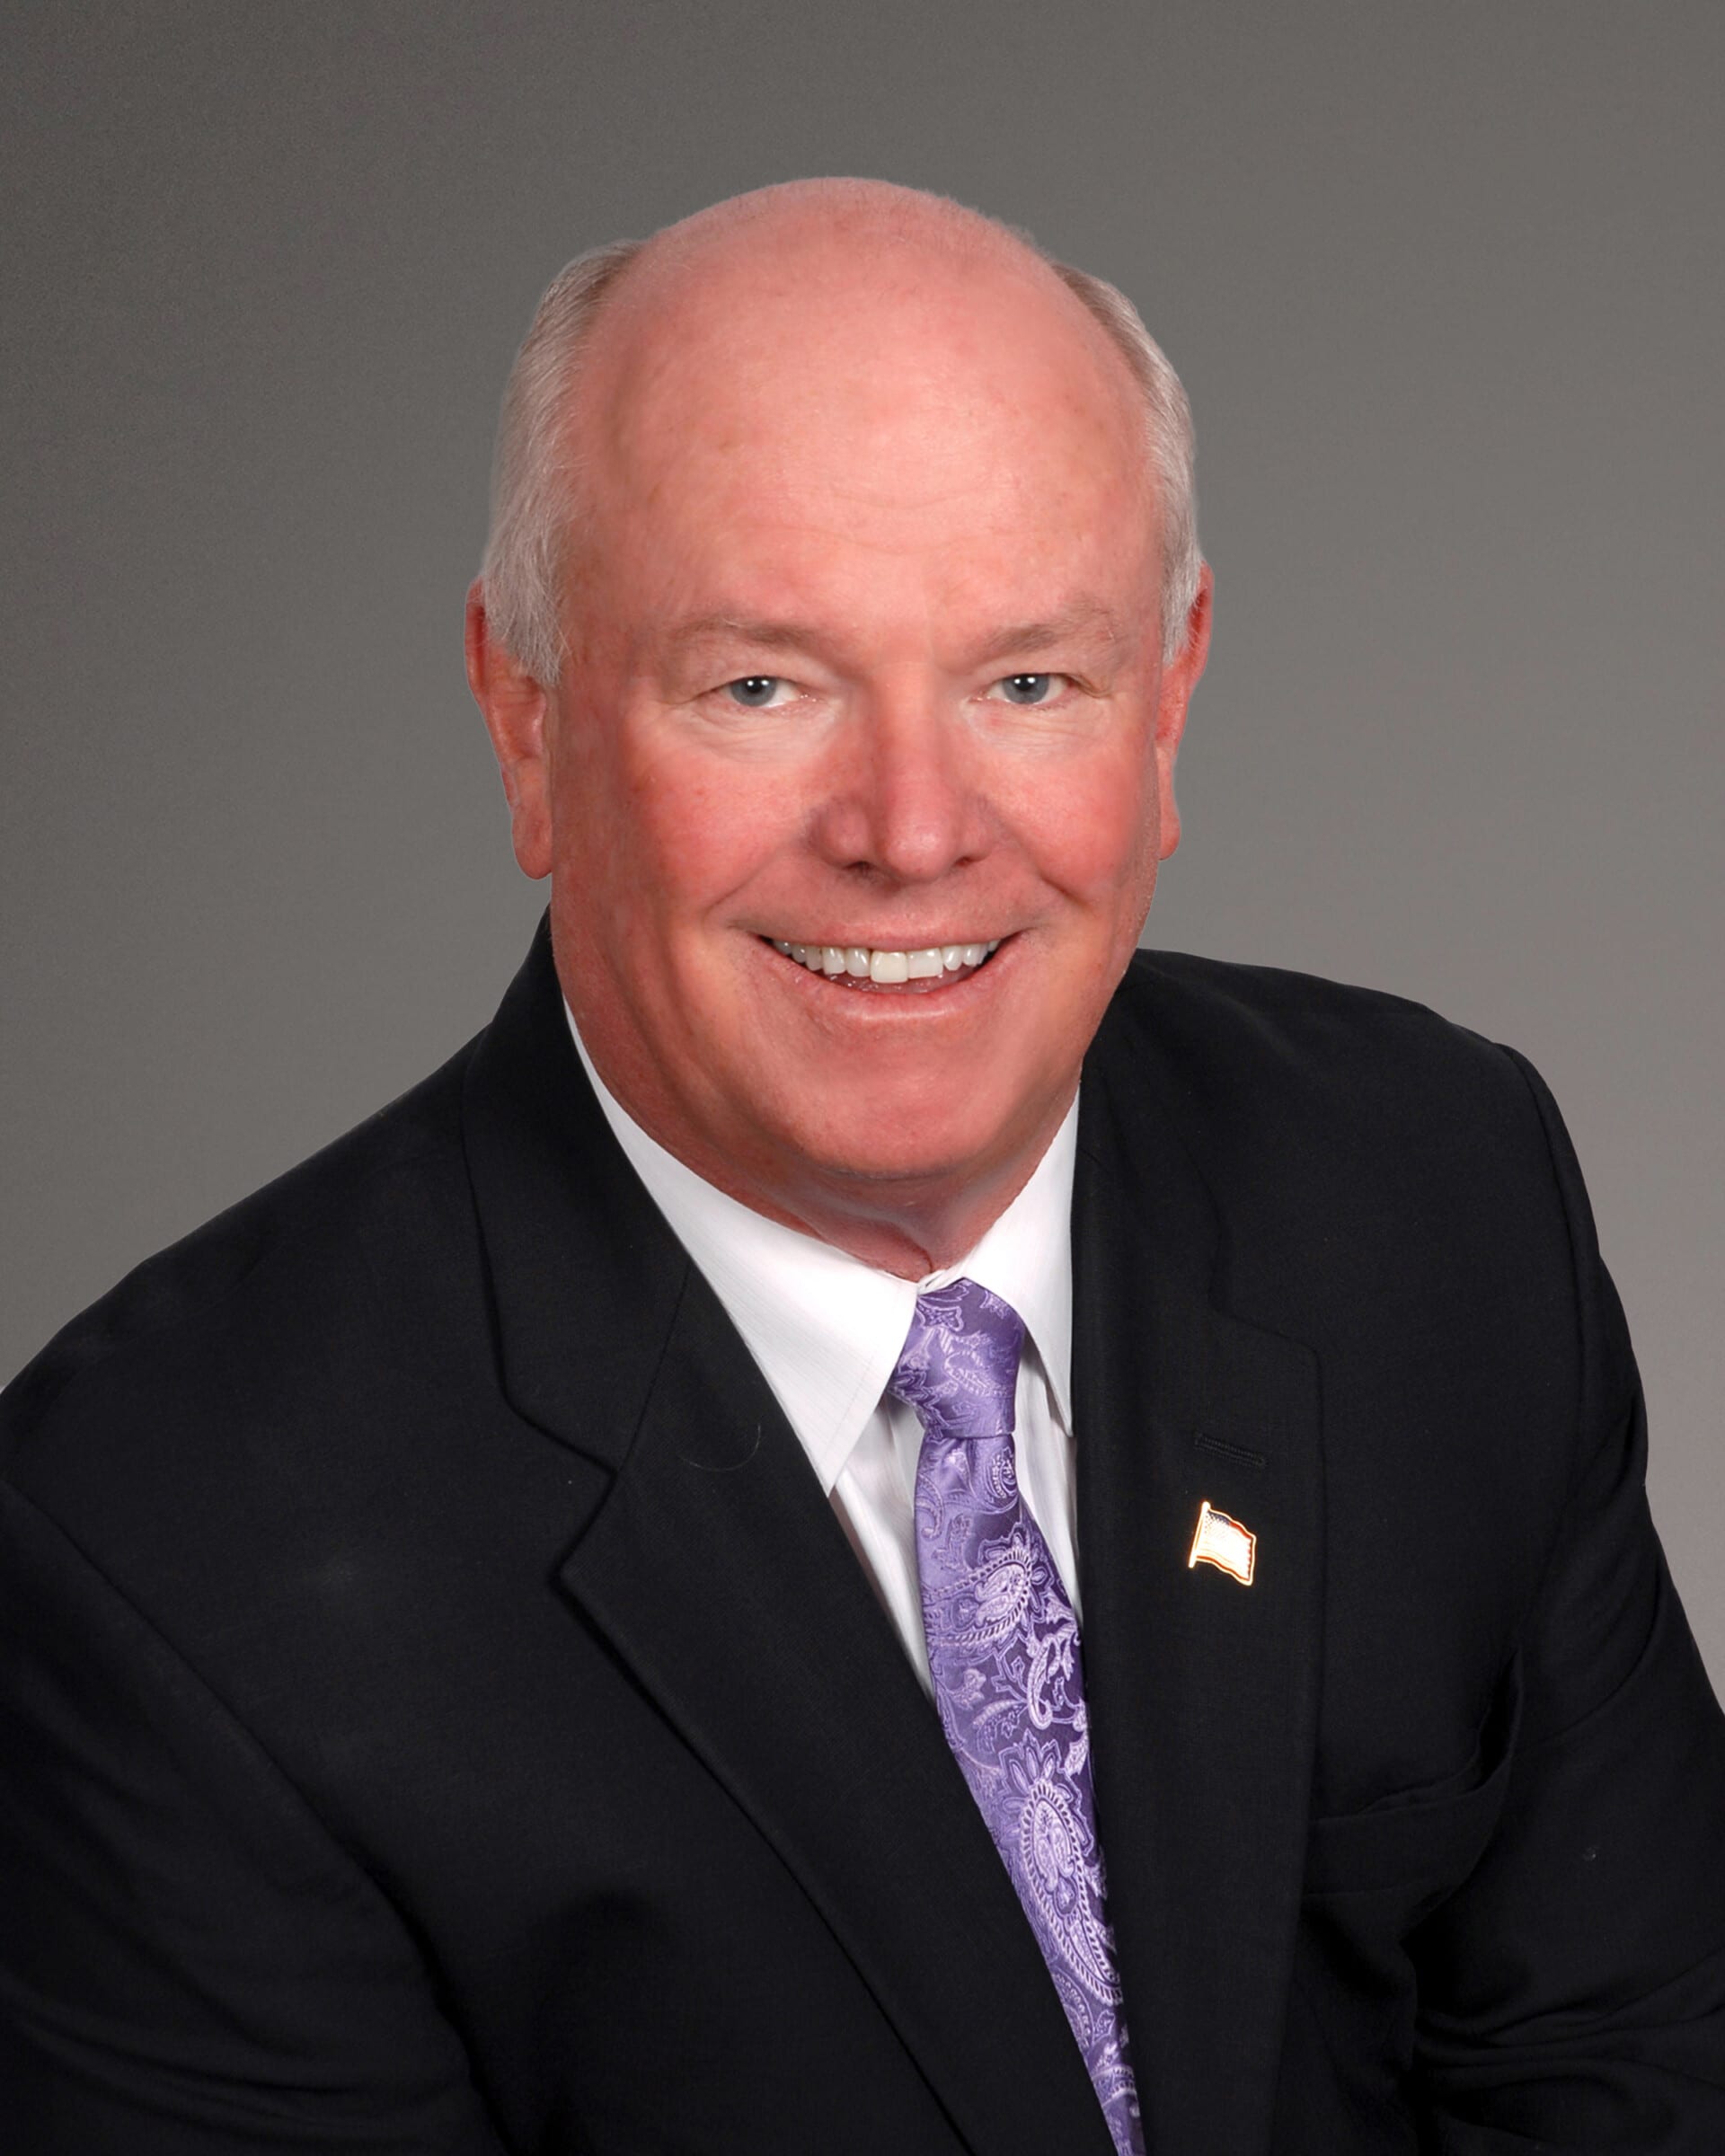 Jim Allmon is Appointed to the Aerospace and Aviation Advisory Committee